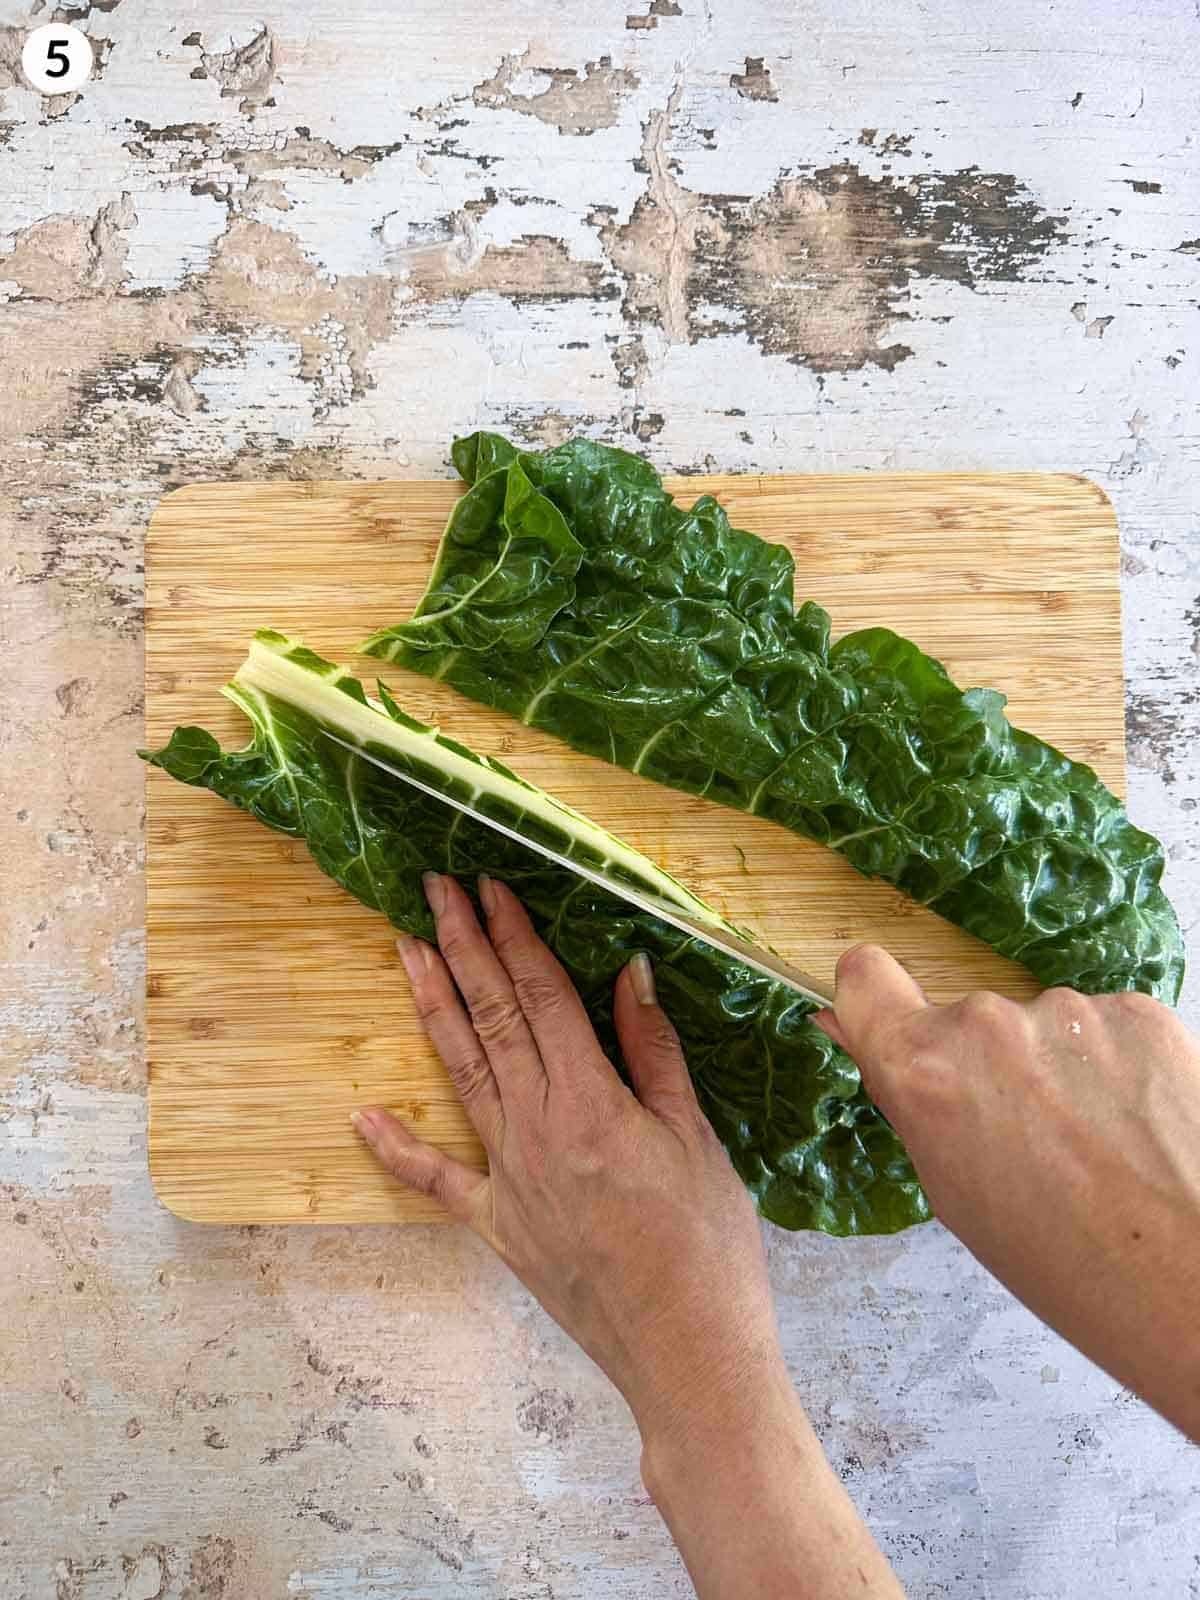 Removing the rib of the silverbeet with a knife on a wooden chopping board